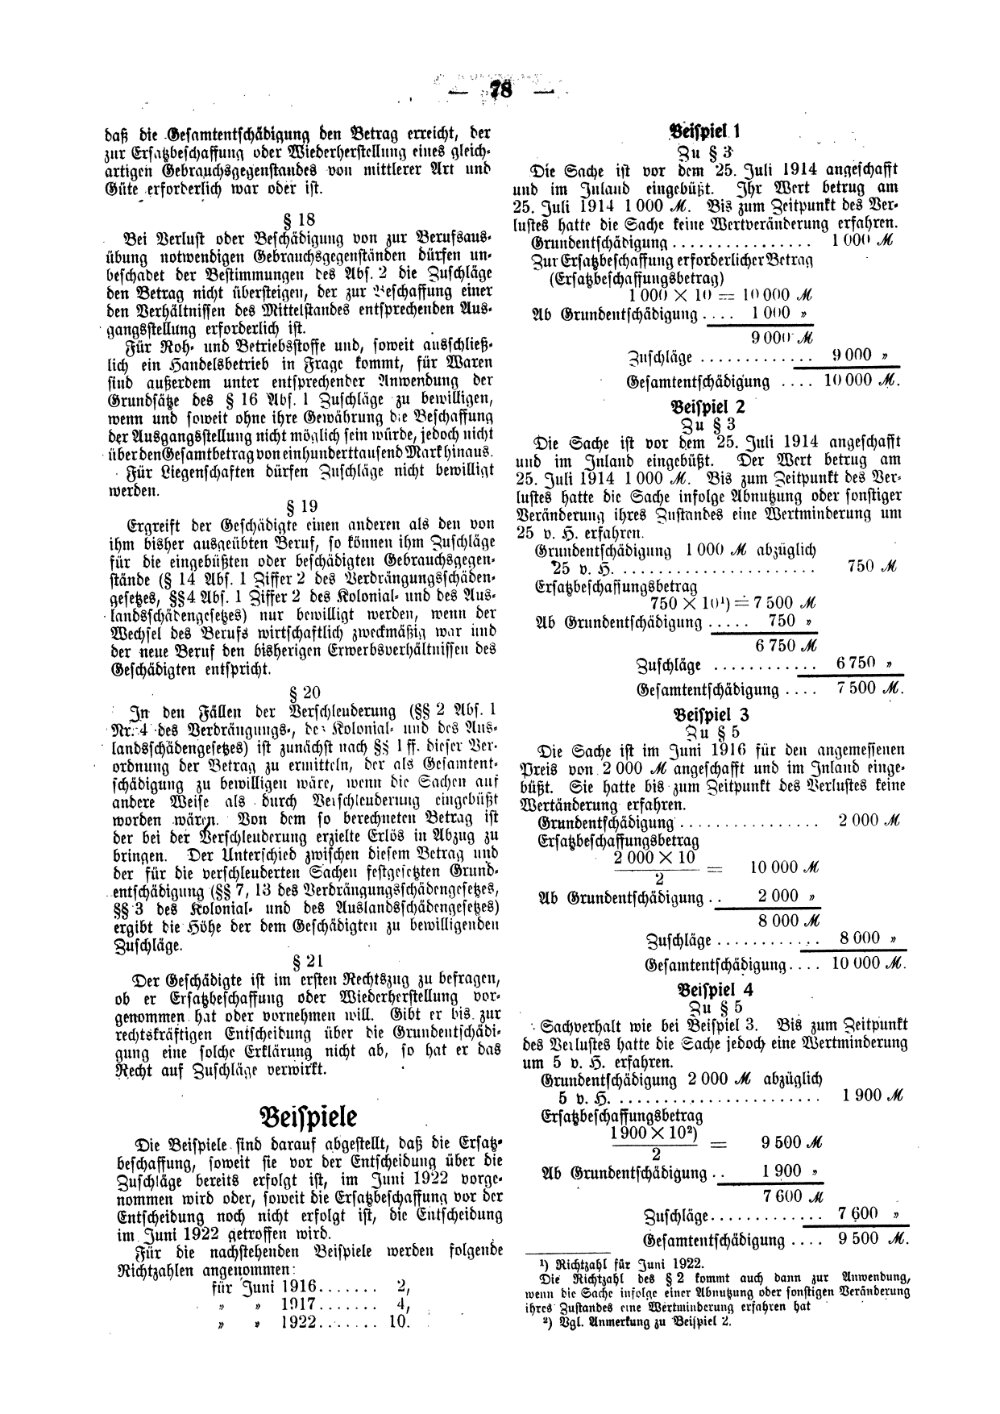 Scan of page 78